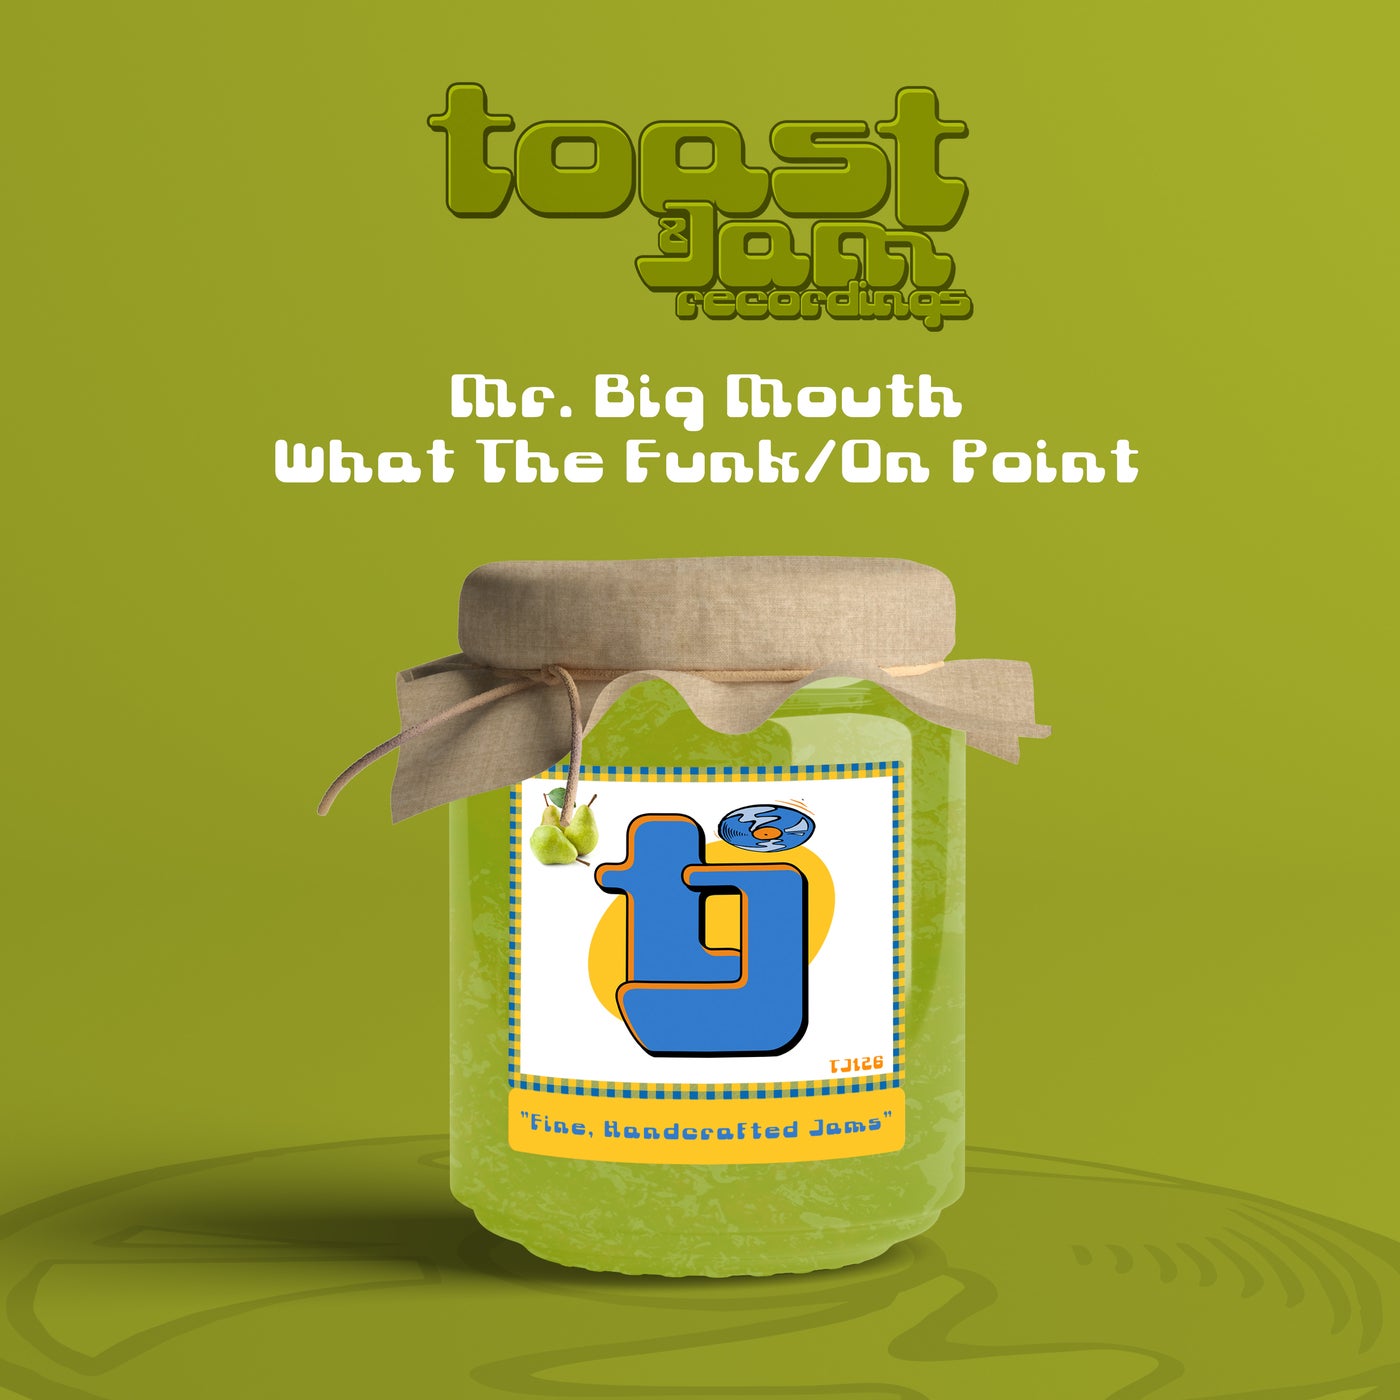 What The Funk/On Point EP